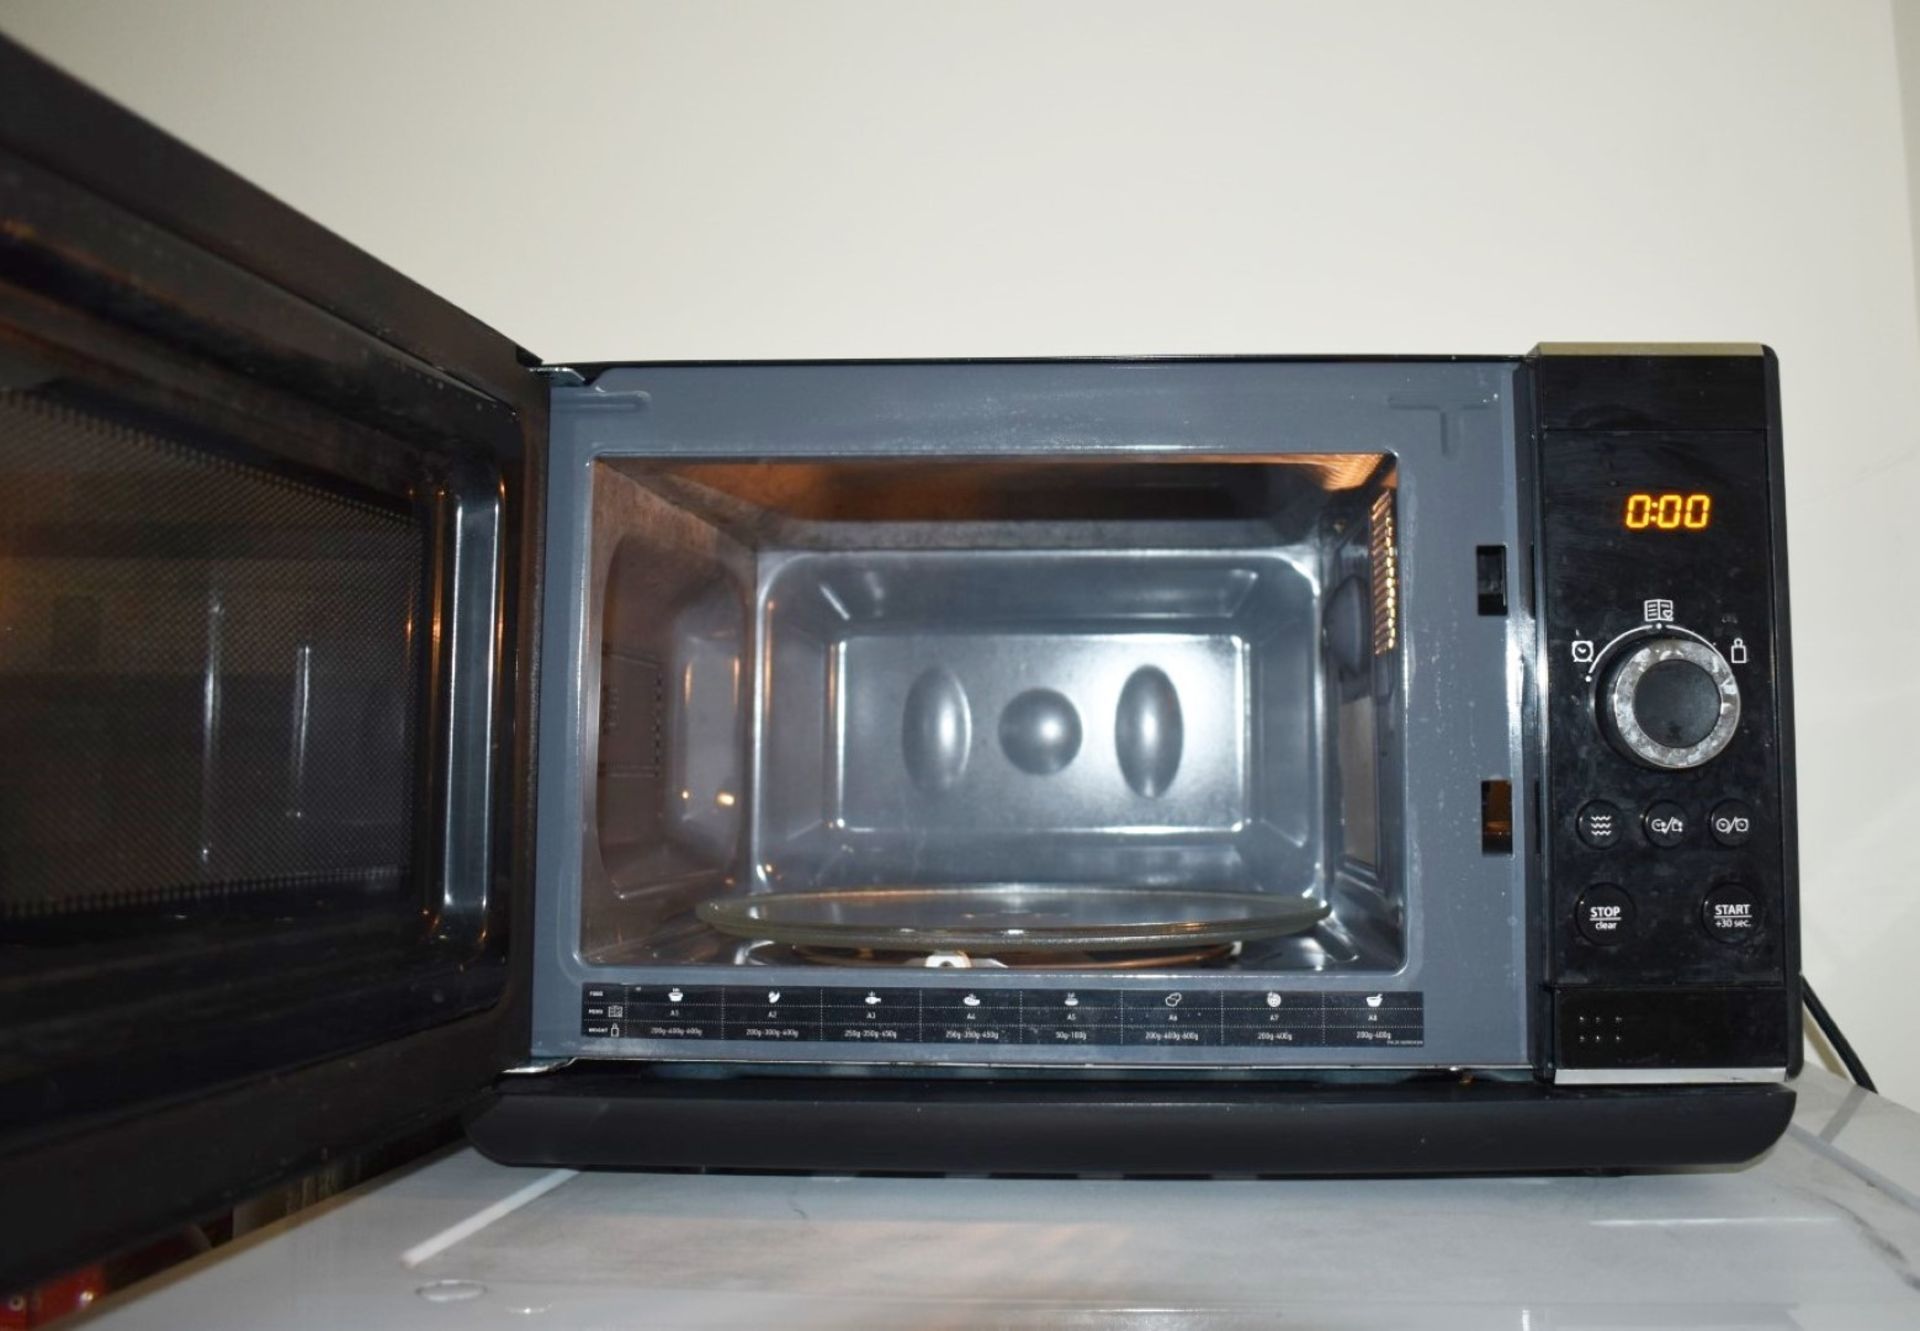 1 x Hotpoint Microwave Oven in Black - Image 2 of 2